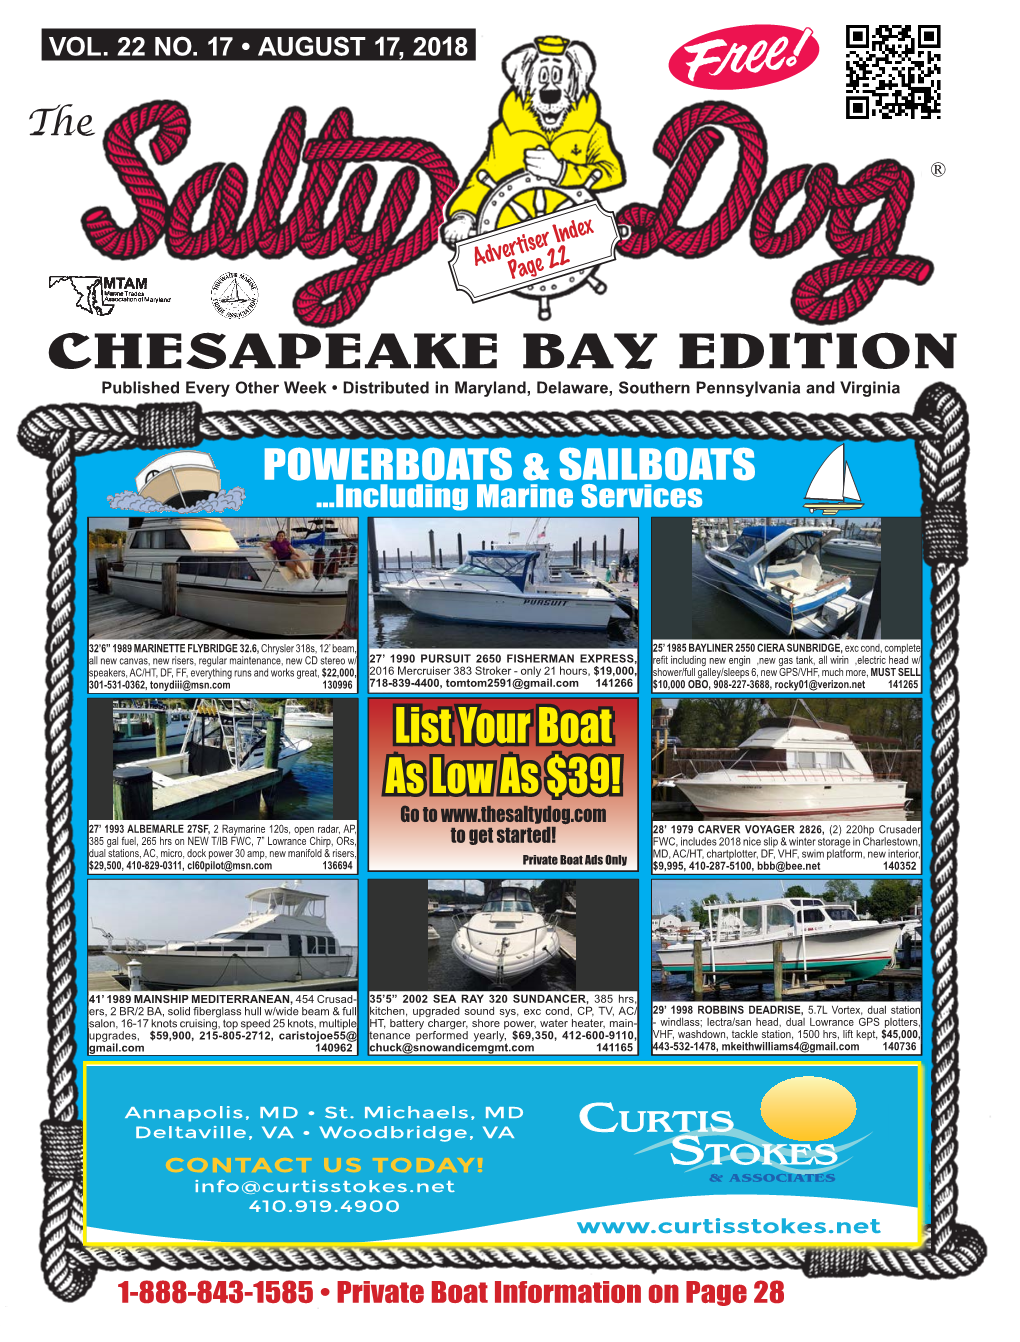 CHESAPEAKE BAY EDITION Published Every Other Week • Distributed in Maryland, Delaware, Southern Pennsylvania and Virginia